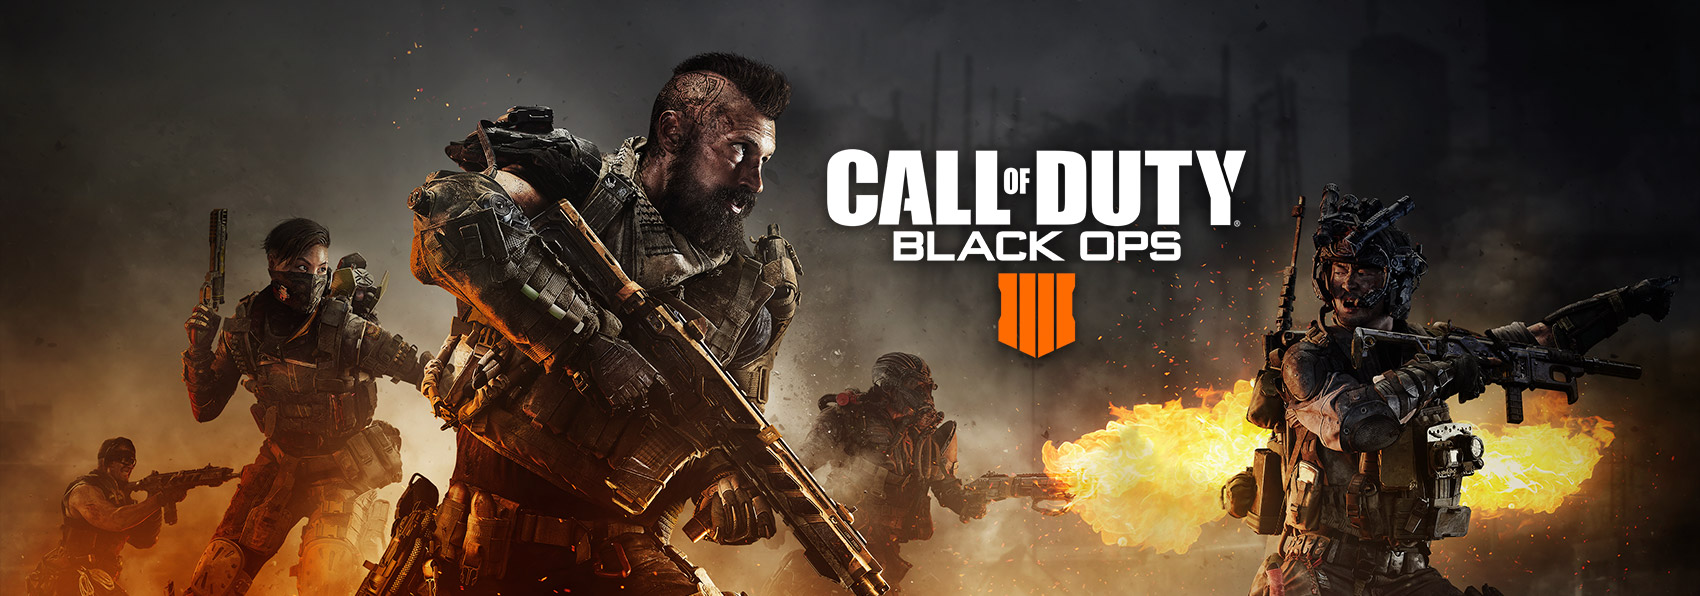 Call of Duty Black Ops 4 Wallpapers, Blackout Wallpapers | GameGuideHQ